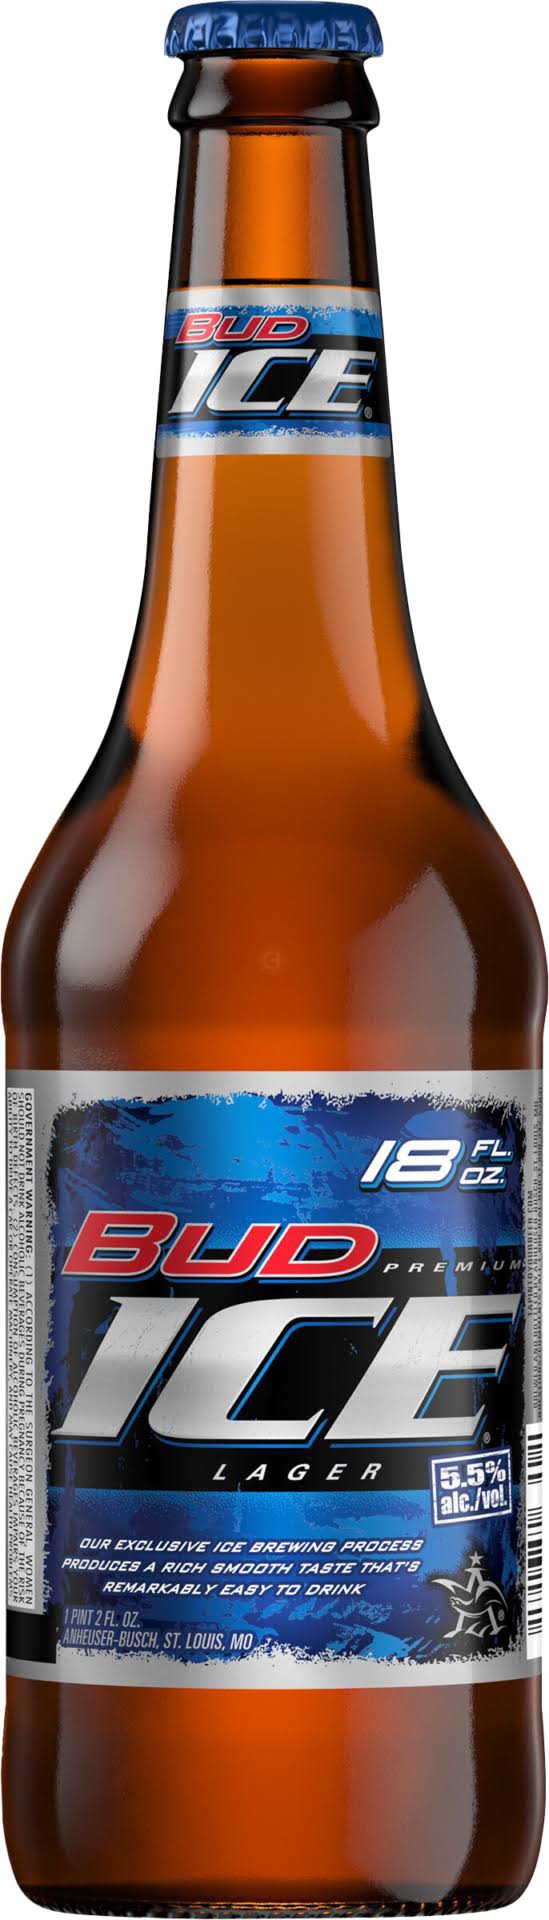 Bud Ice Lager Beer - 18oz